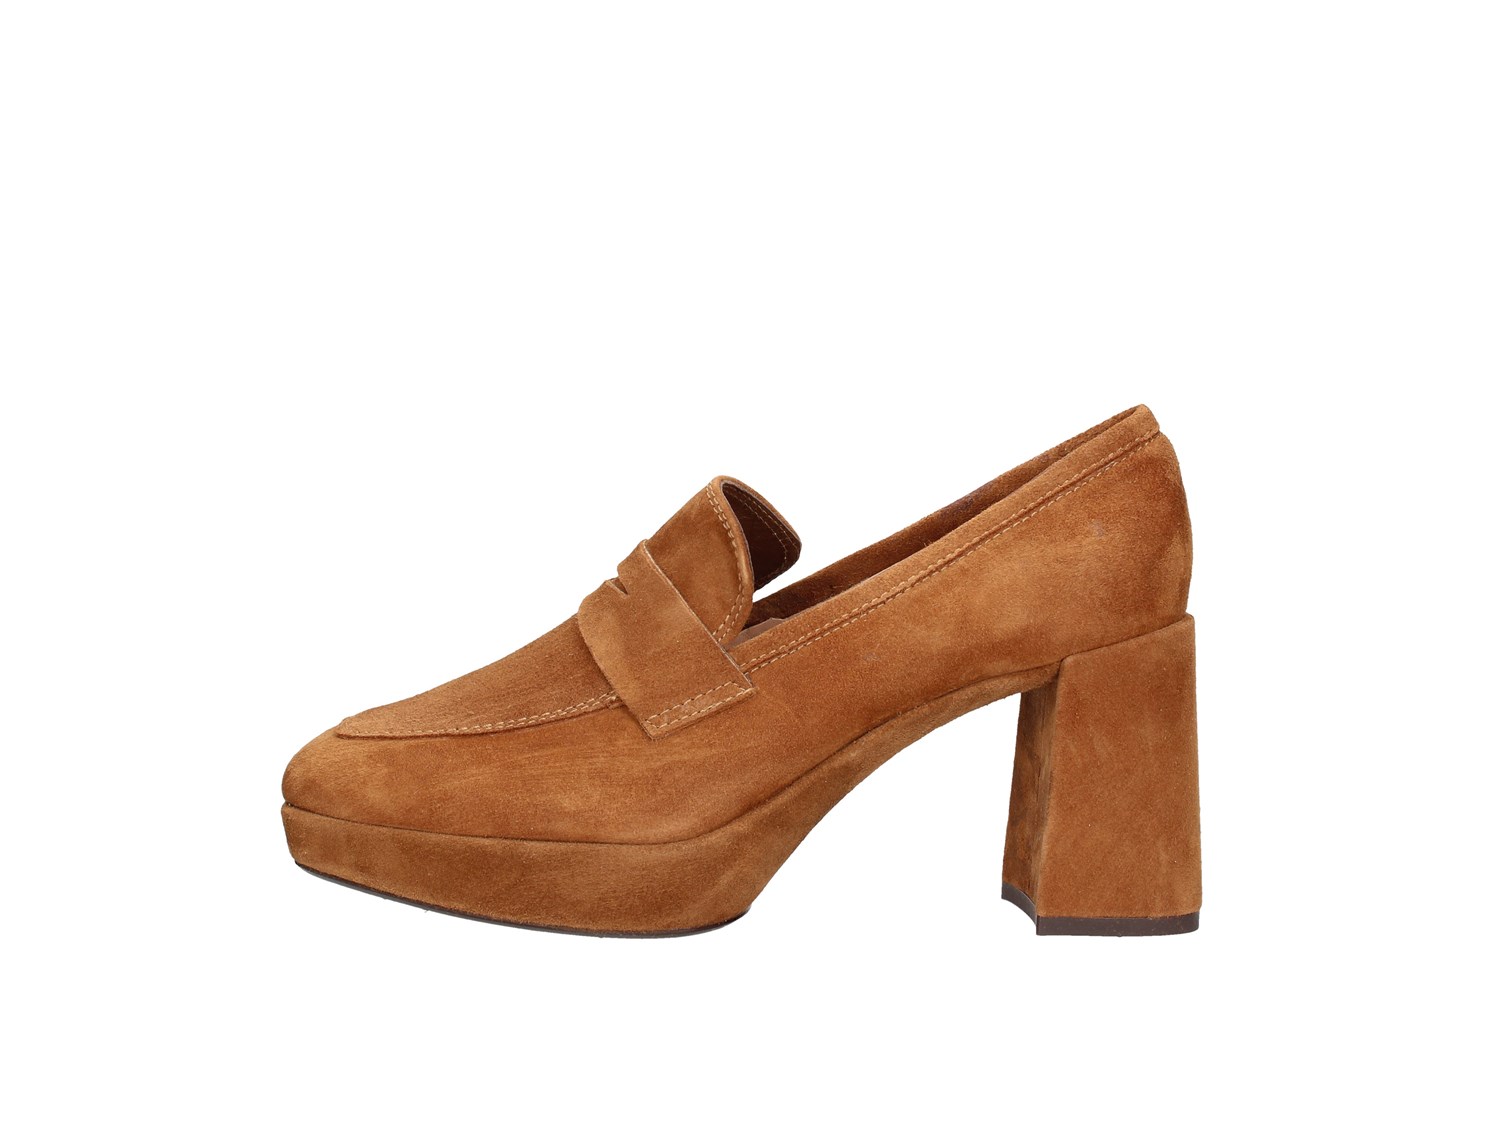 Unisa Misale Leather Shoes Women Moccasin